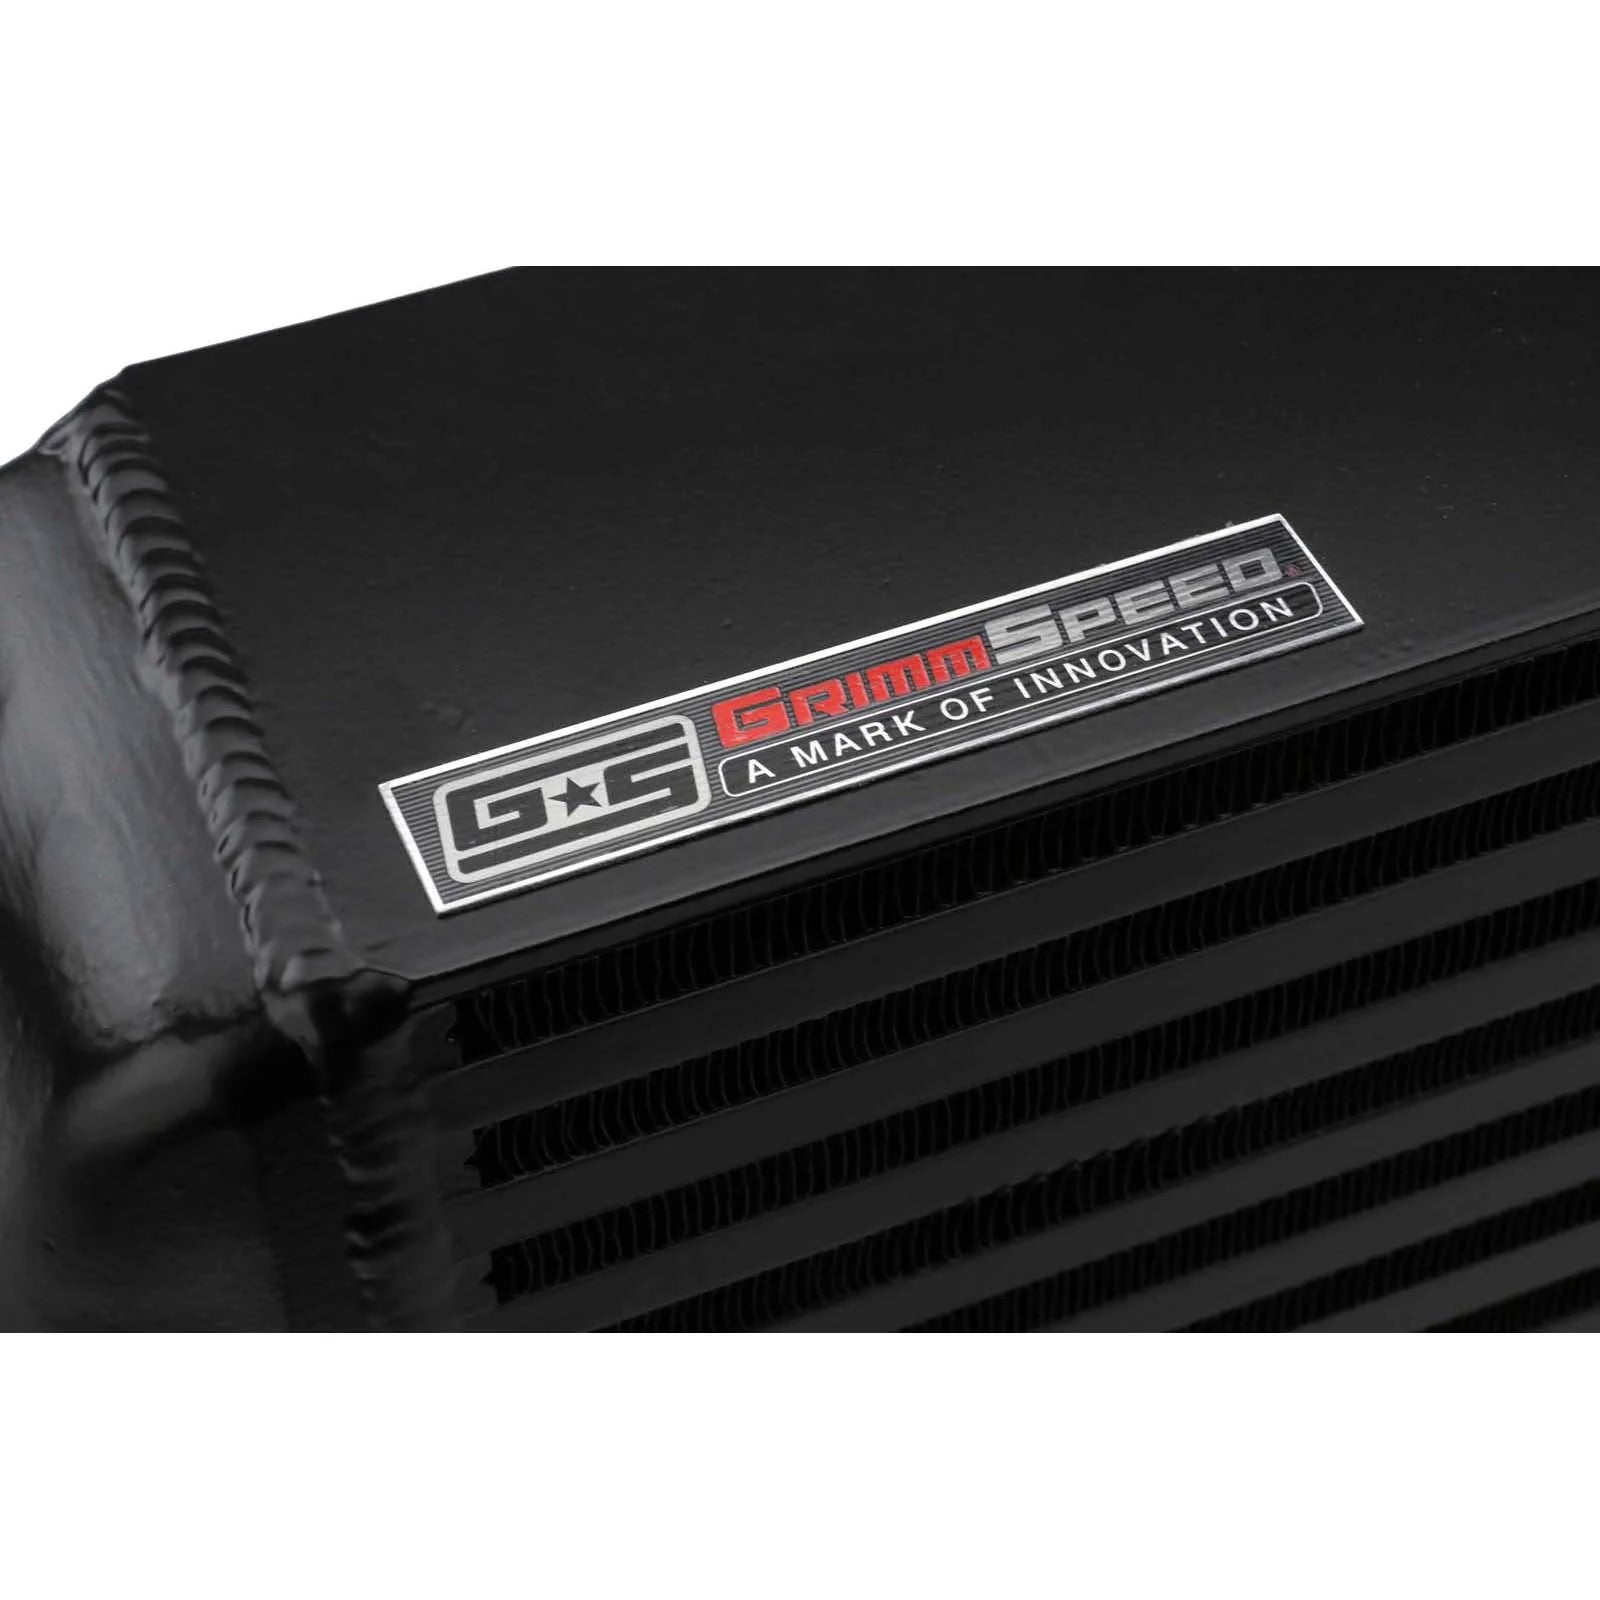 GrimmSpeed Front Mount Intercooler Kit - Black Core with Black Piping - 2008-14 Subaru WRX